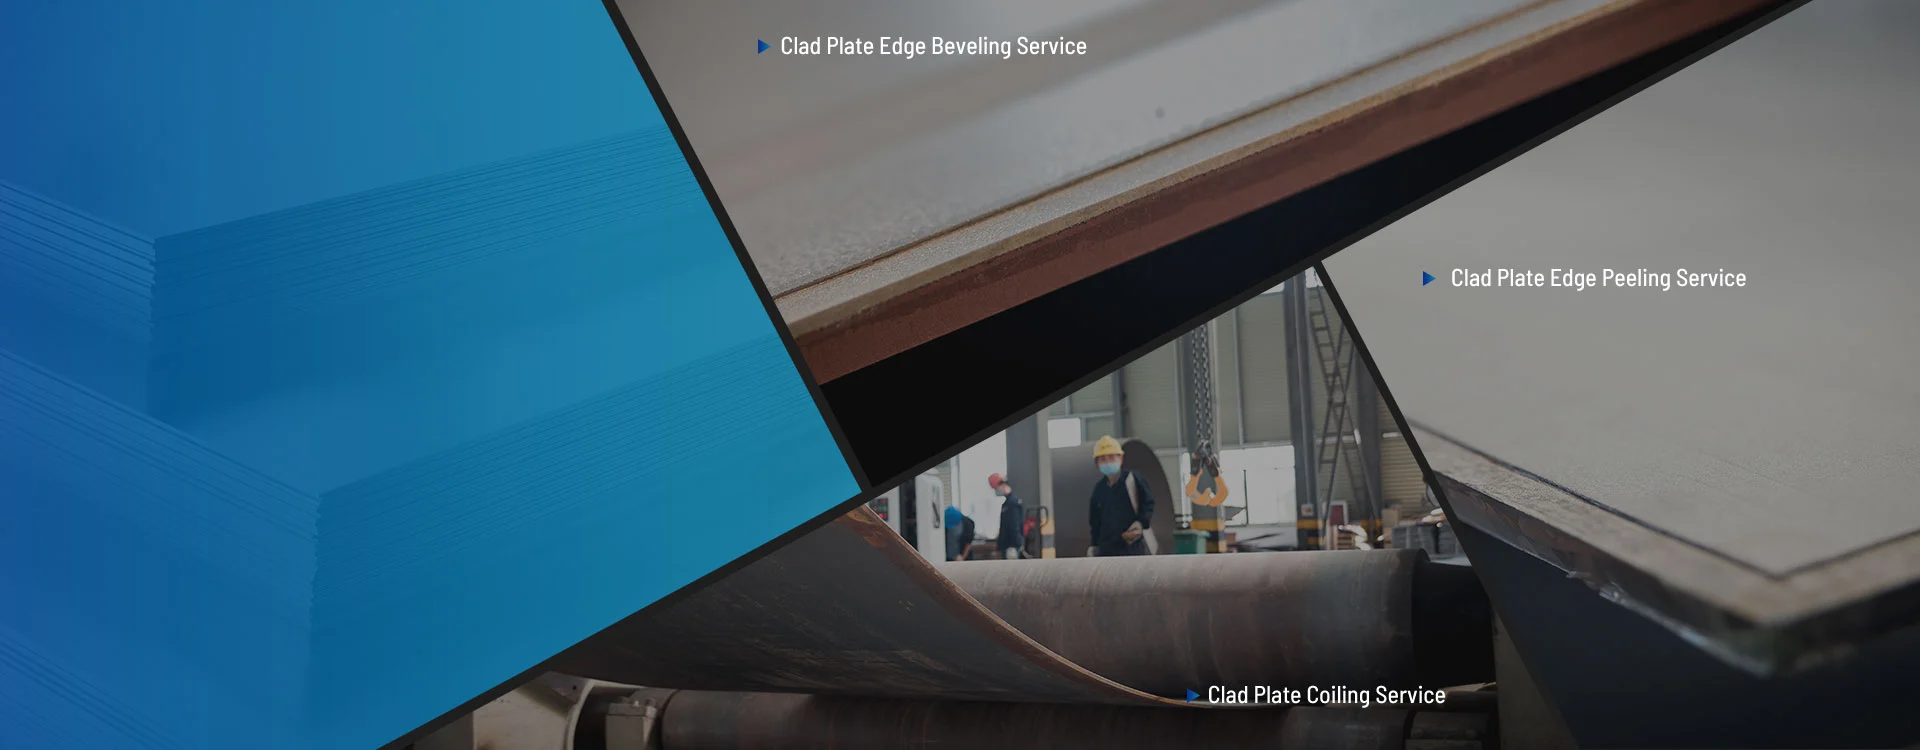 Clad Plate Processing Services